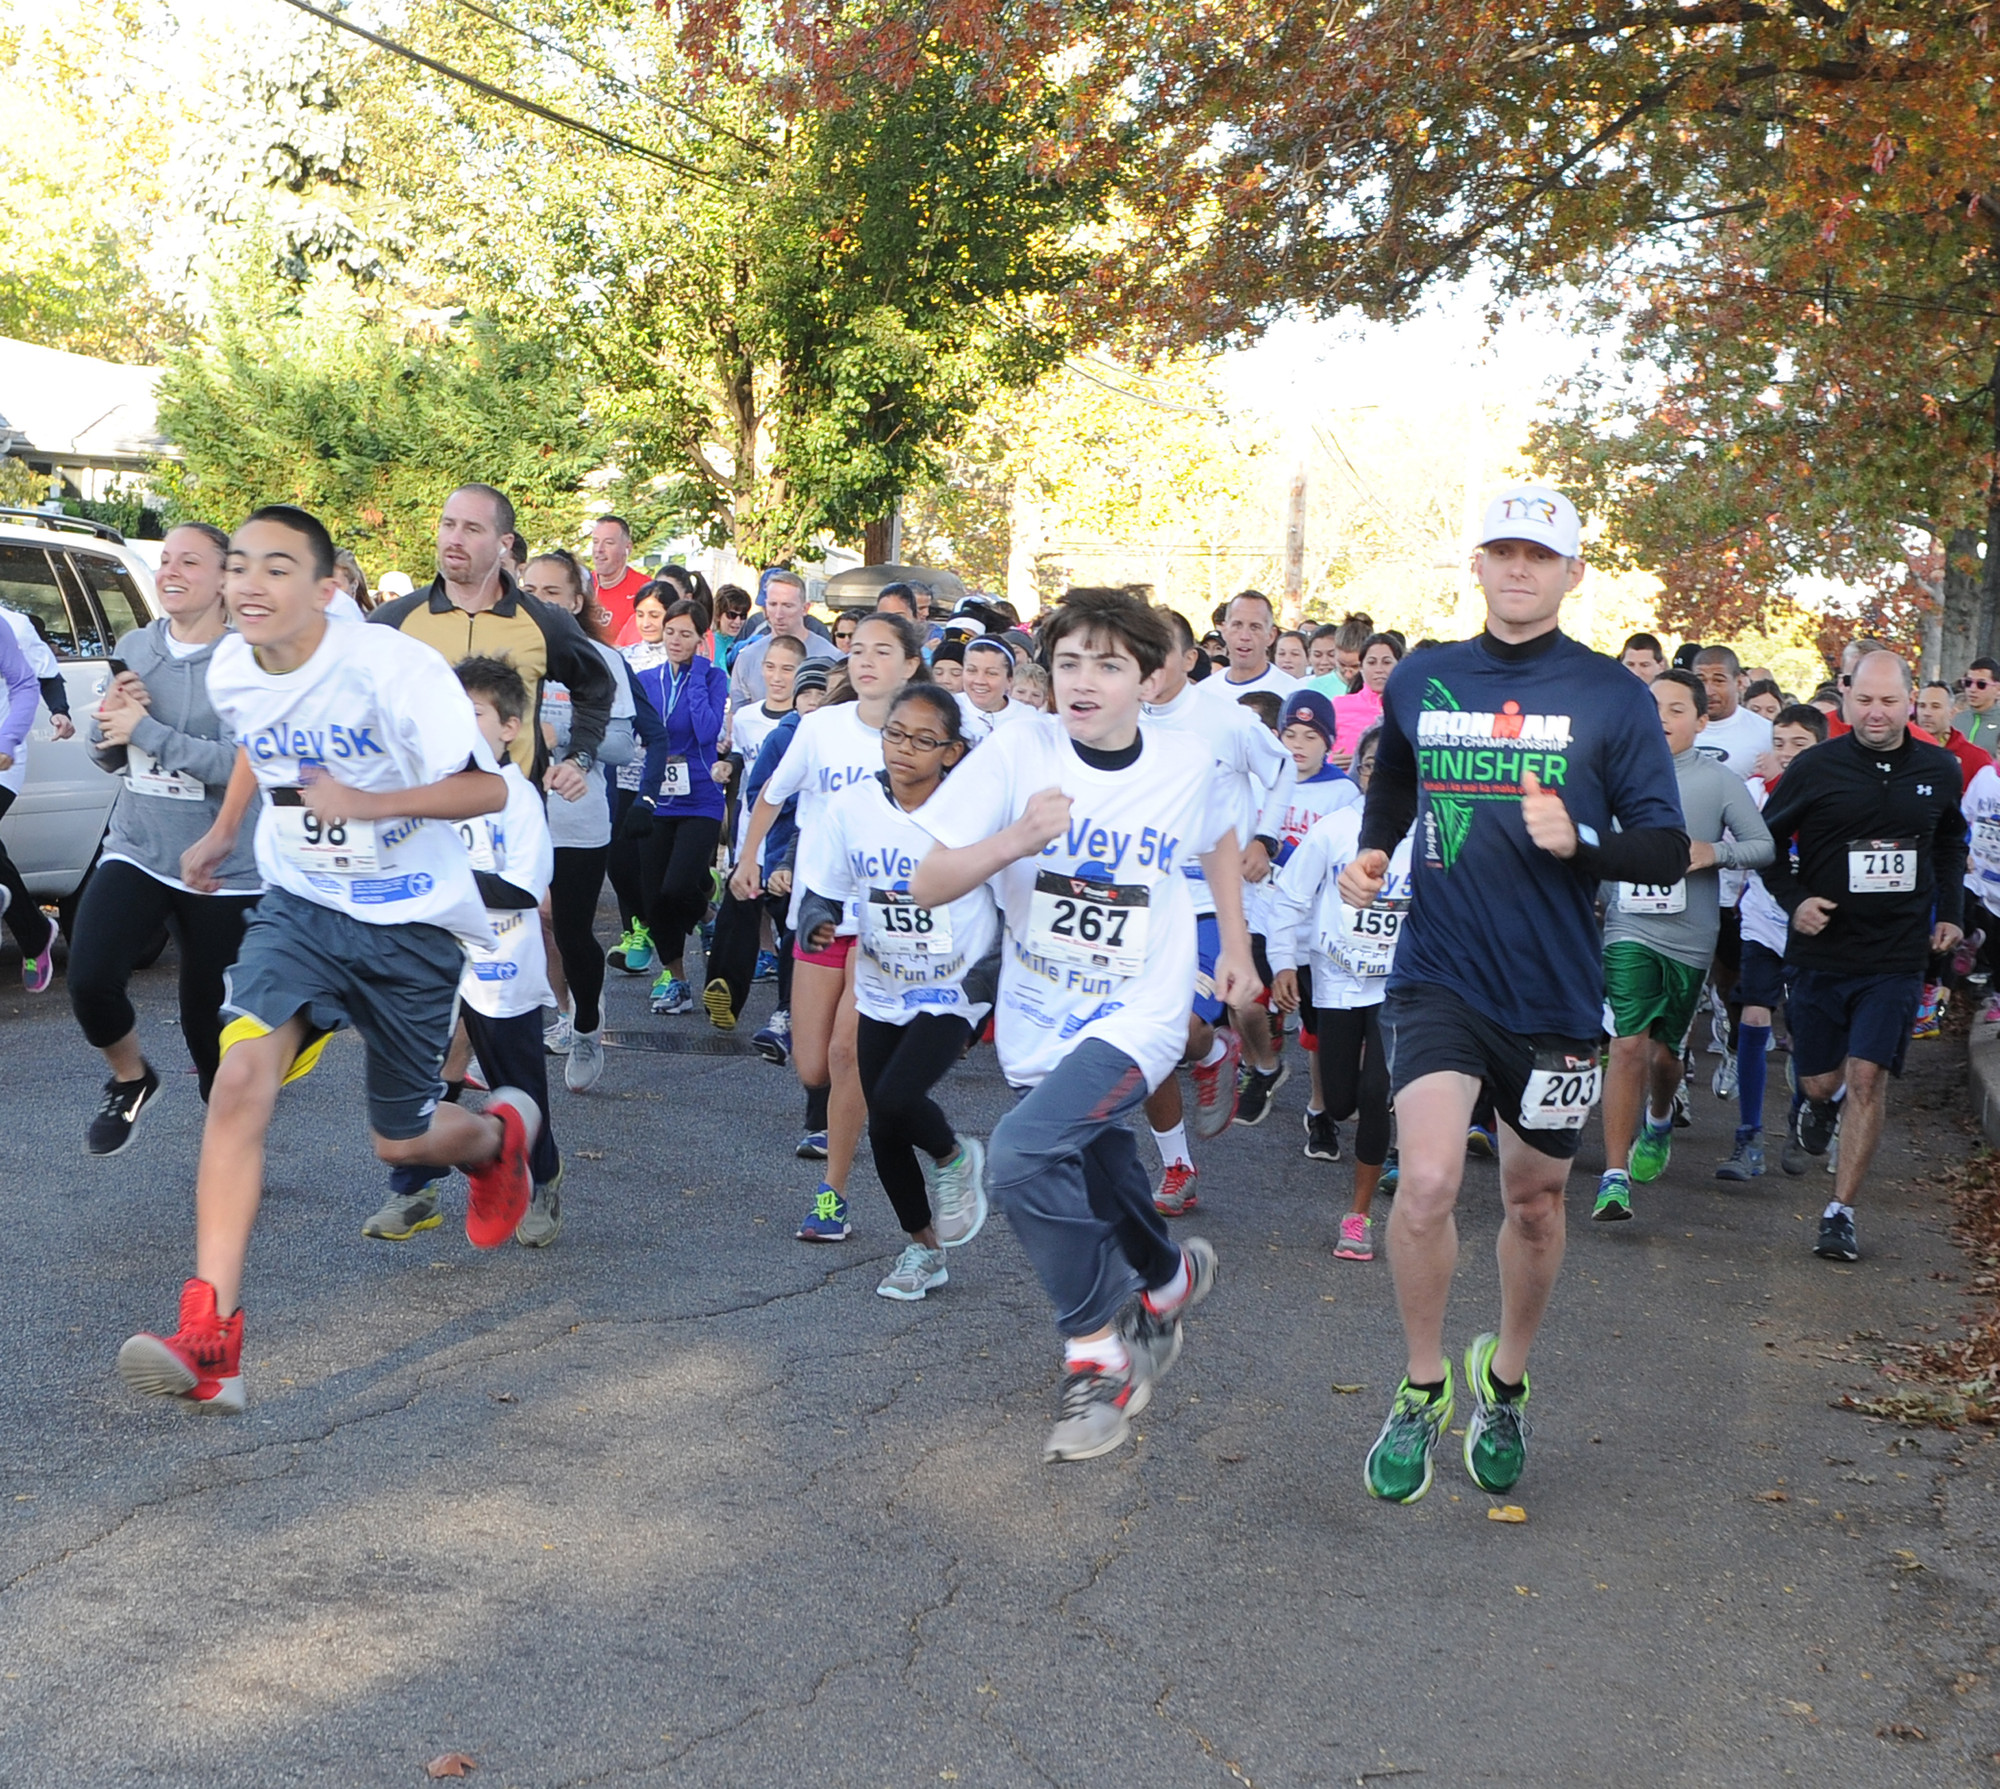 The McVey Elementary School inaugural 5K race and 1-mile fun run hit East Meadow Streets last Sunday, with nearly 400 runners competing in the two races.